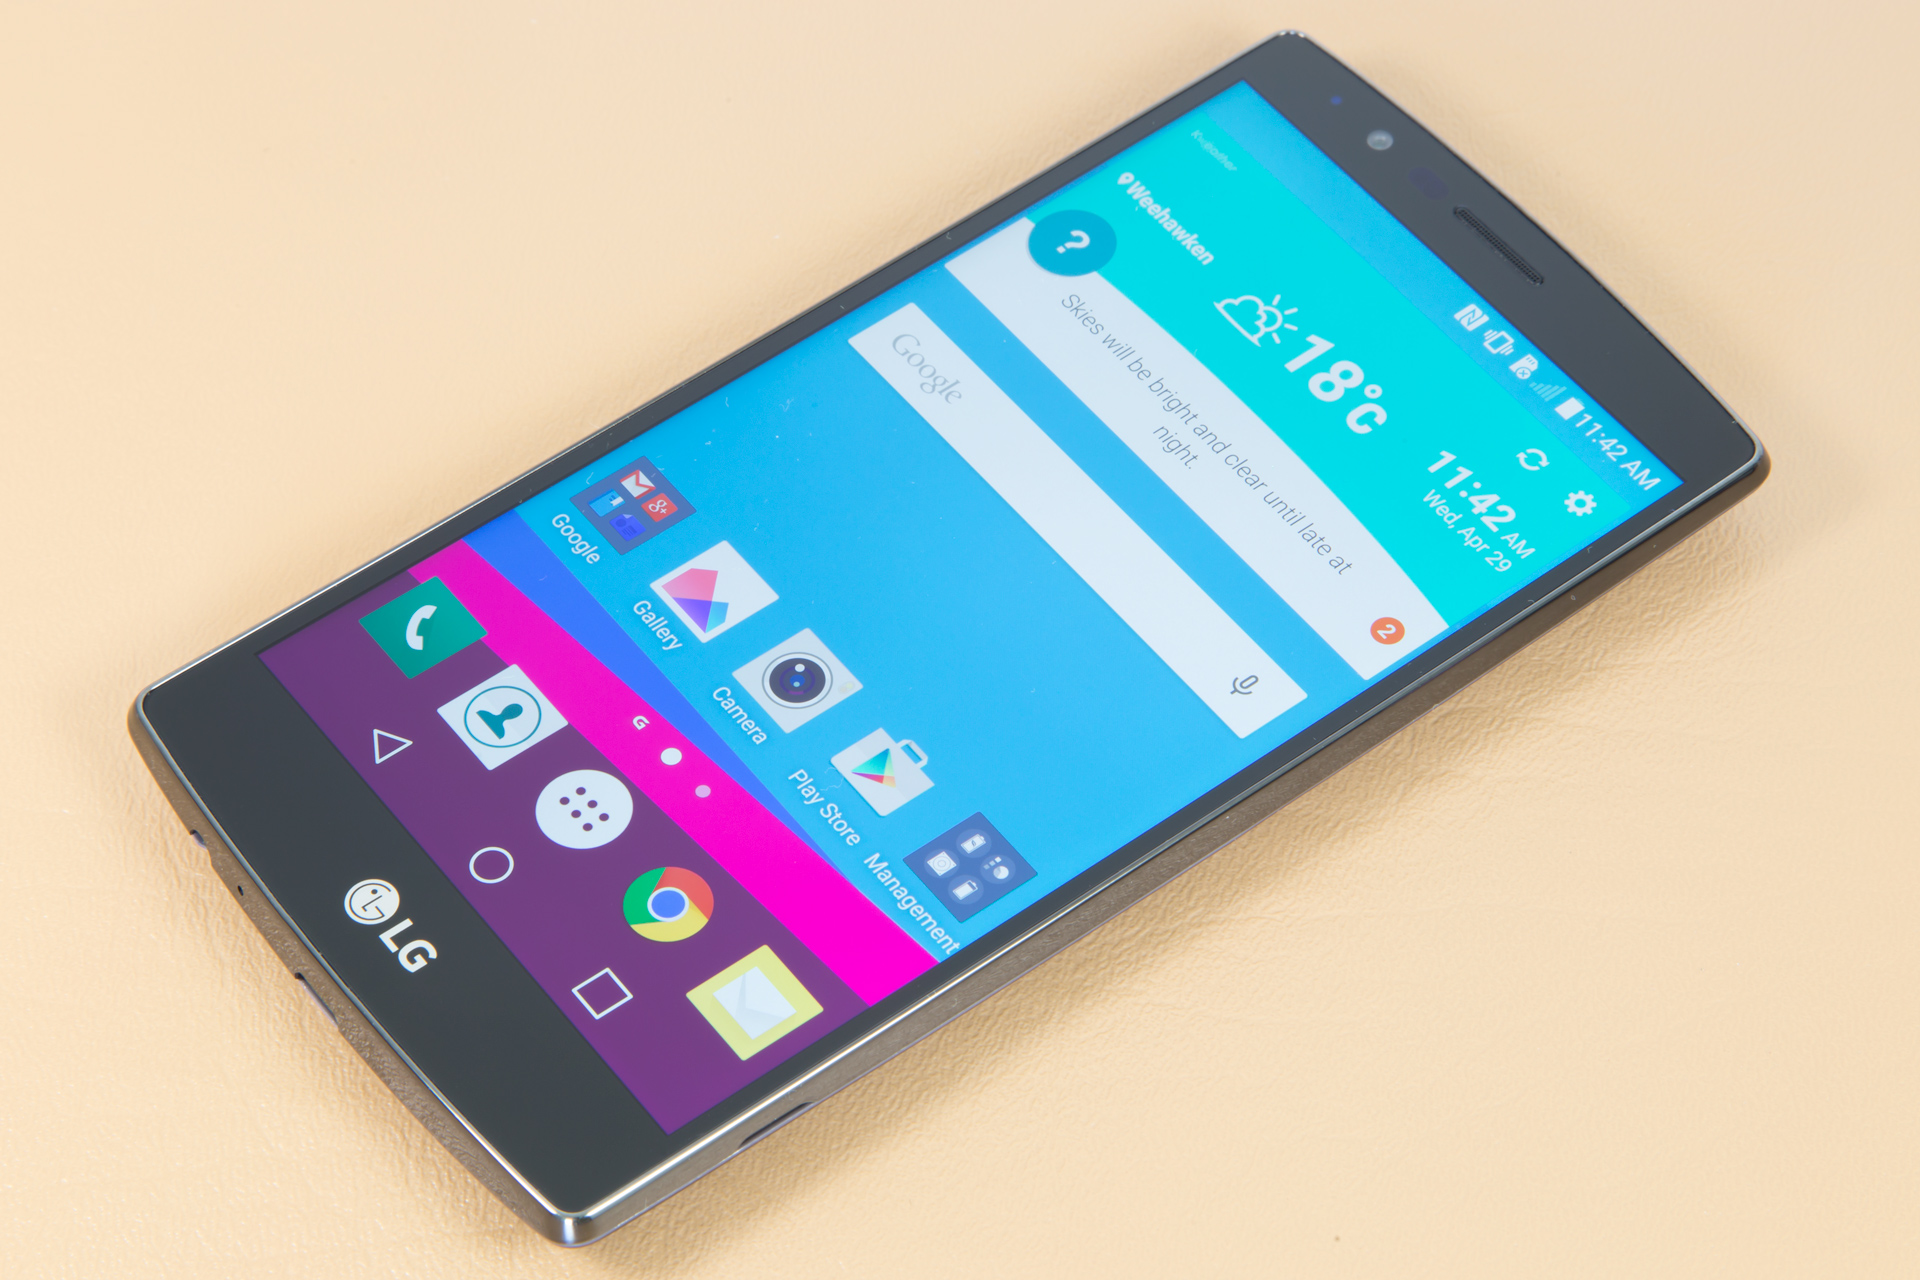 AUH YES: LG G4 Smartphone